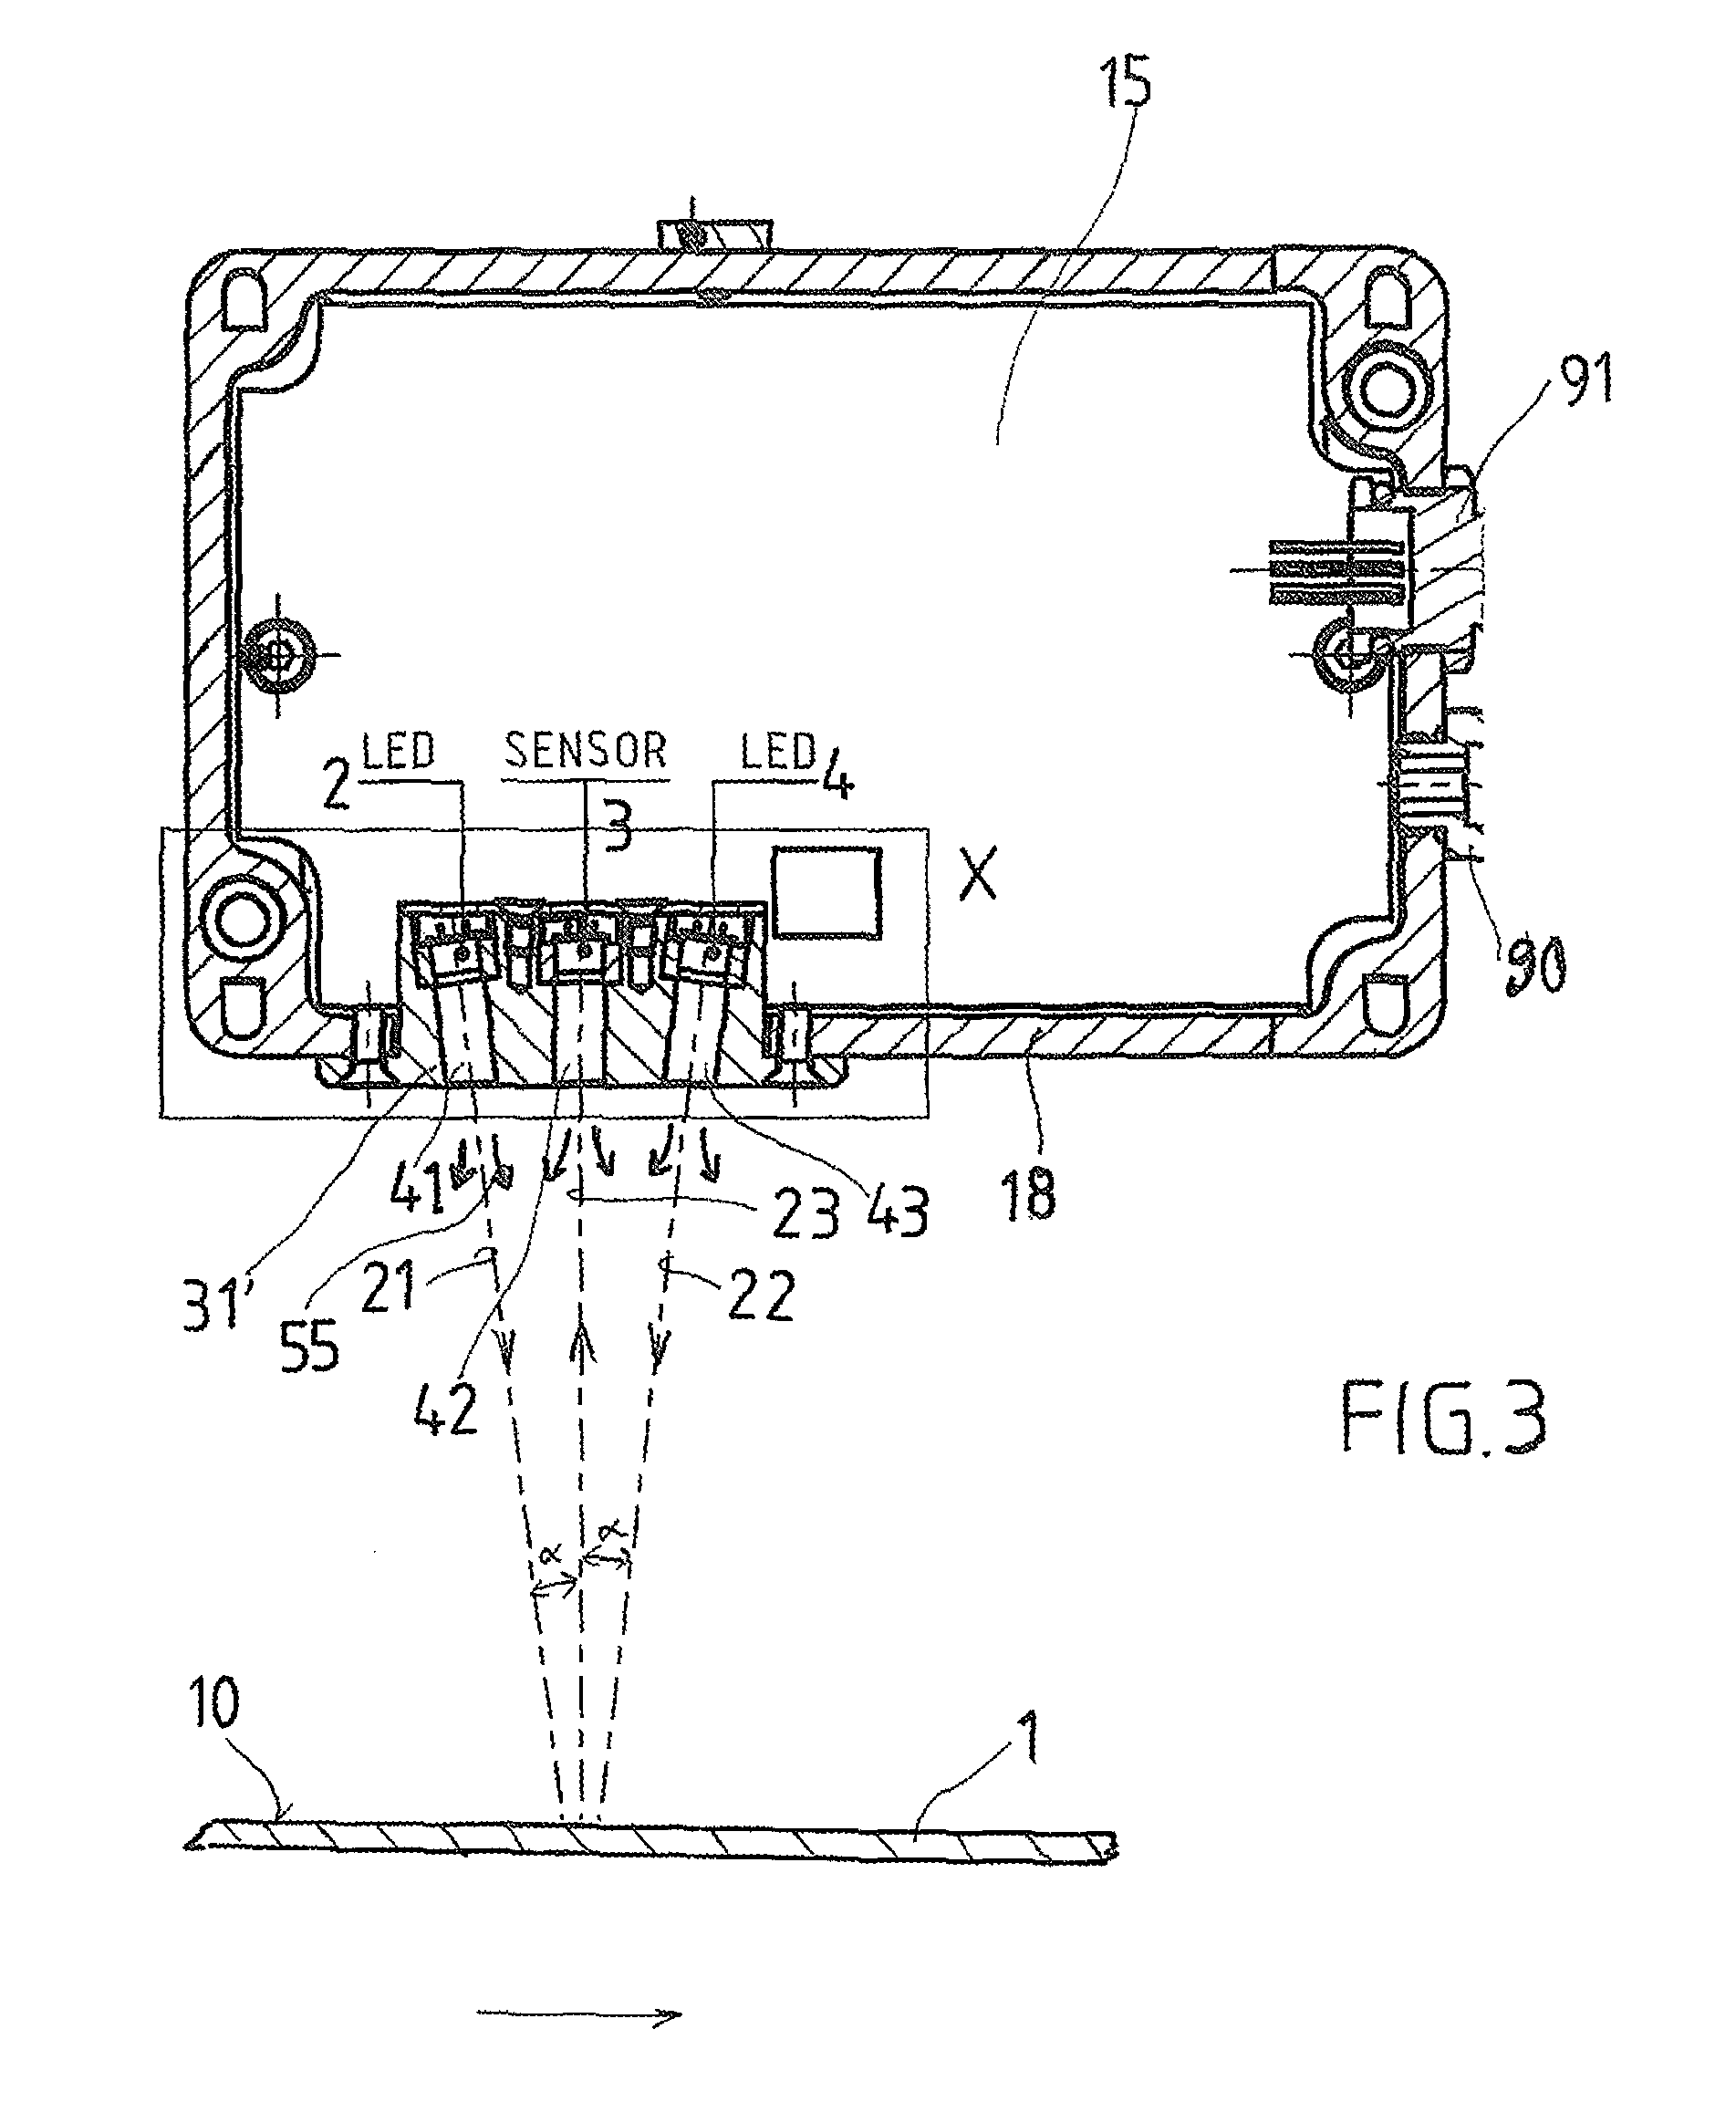 Device for determining the water content of a target